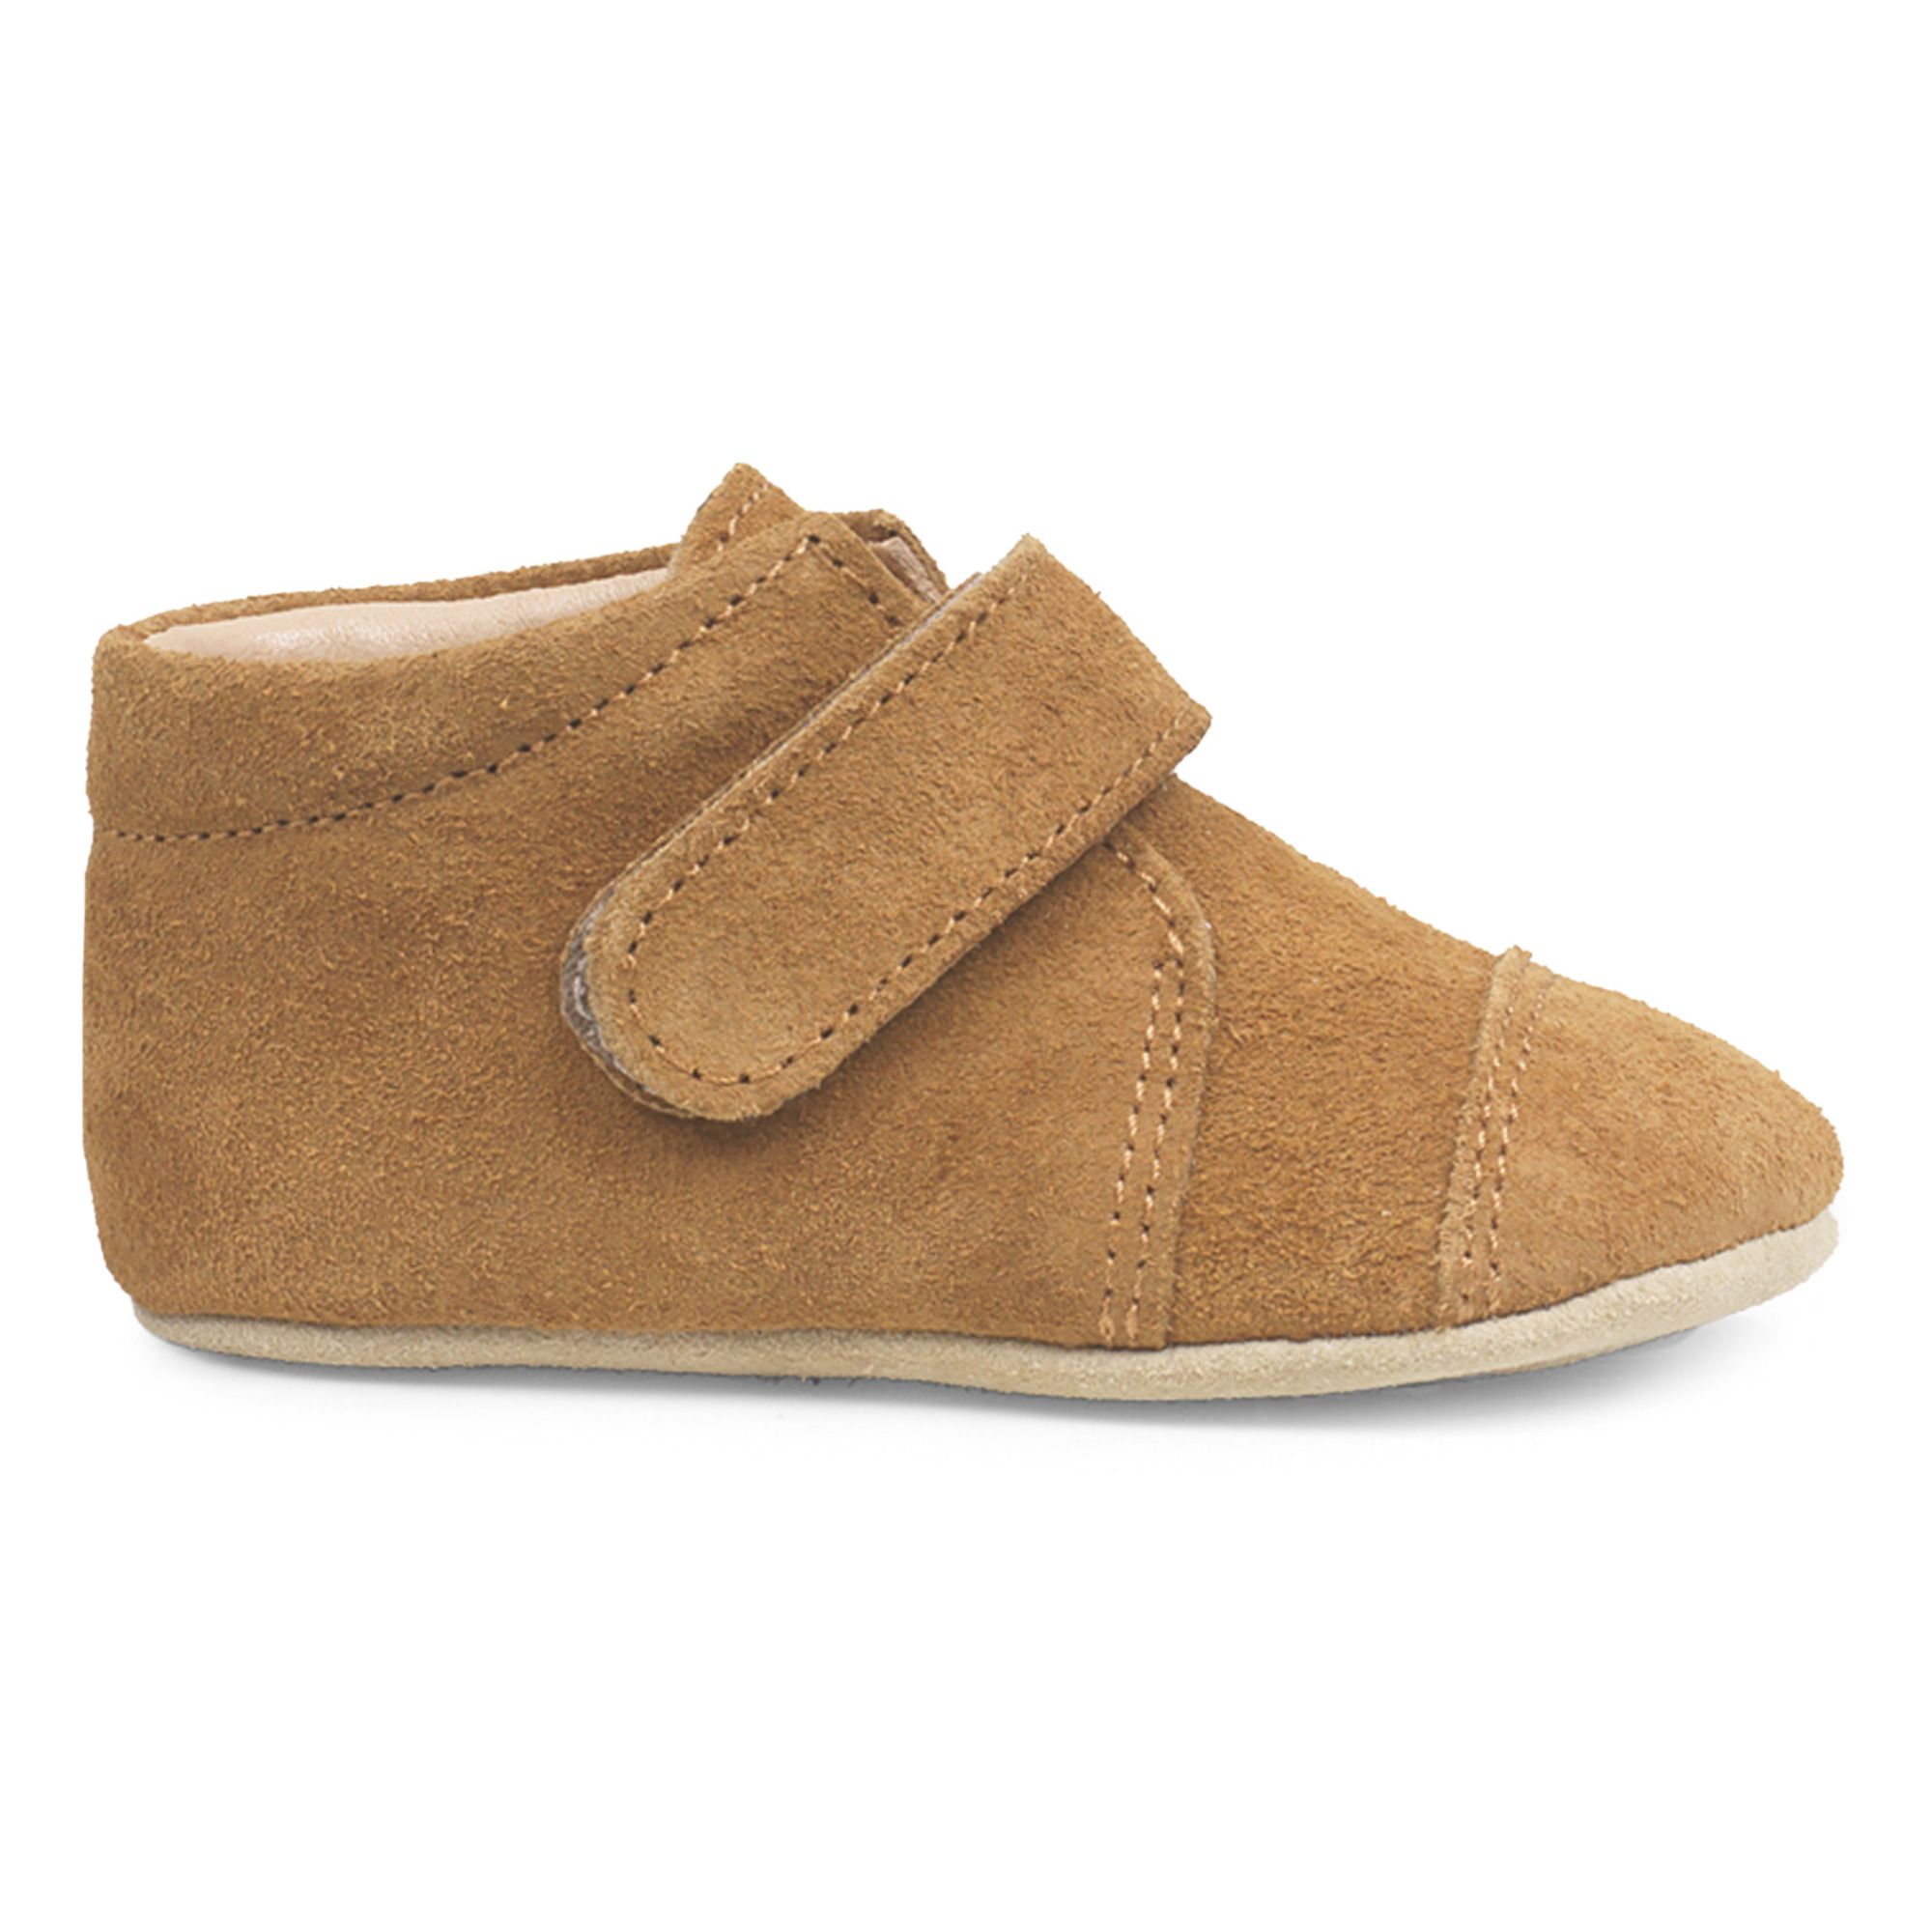 Petit Nord - Chaussons Scratchs - Fille - Camel